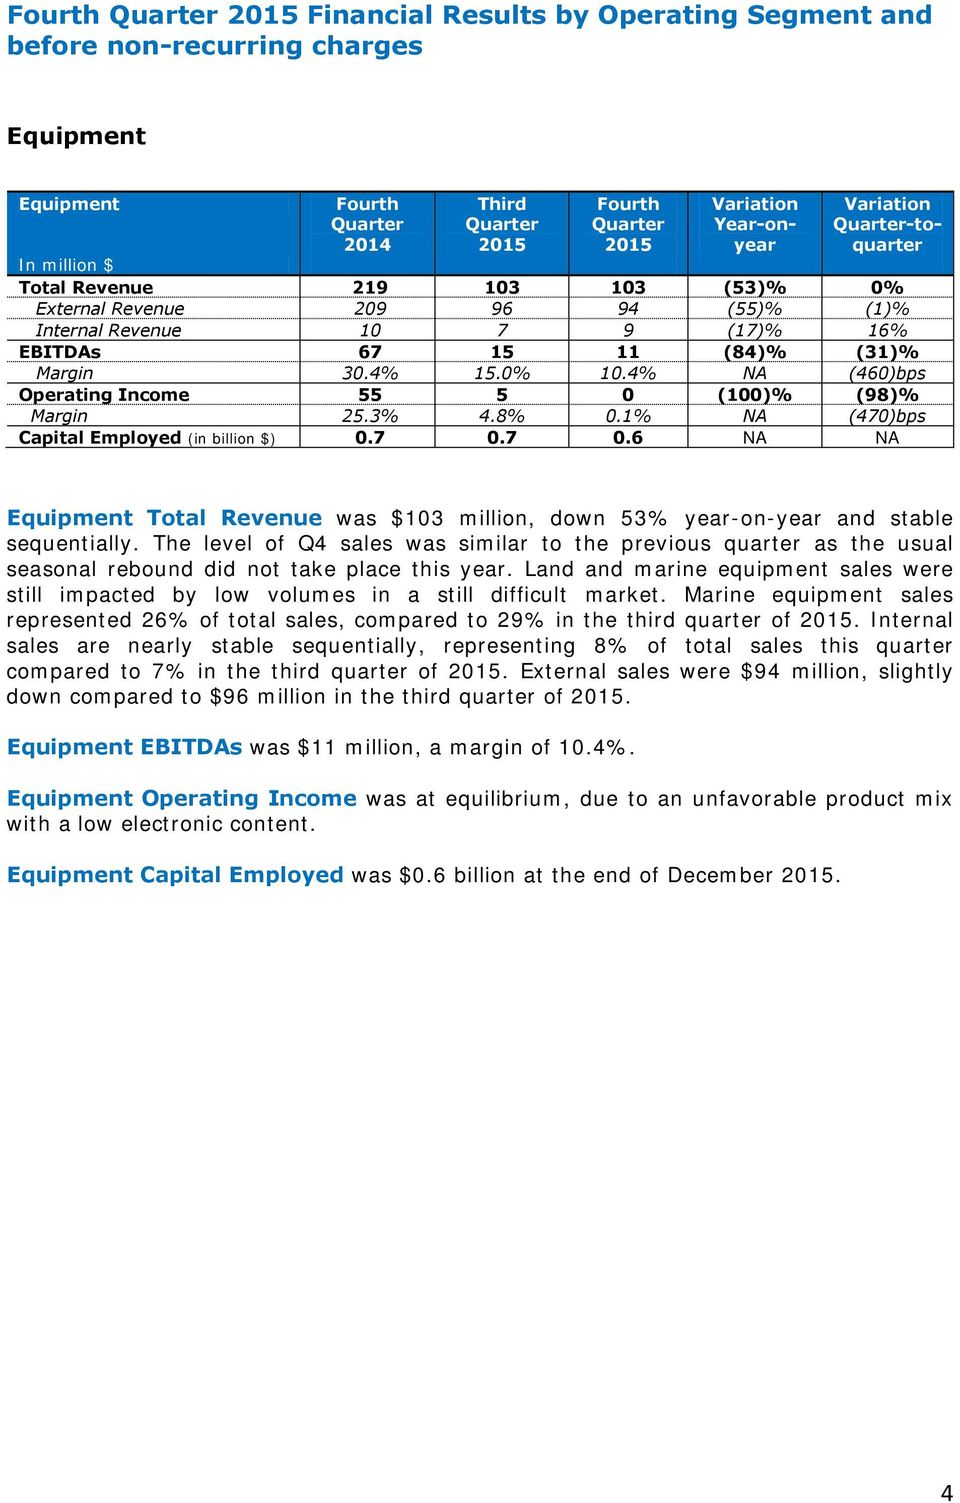 1% NA (470)bps Capital Employed (in billion $) 0.7 0.7 0.6 NA NA Equipment Total Revenue was $103 million, down 53% year-on-year and stable sequentially.